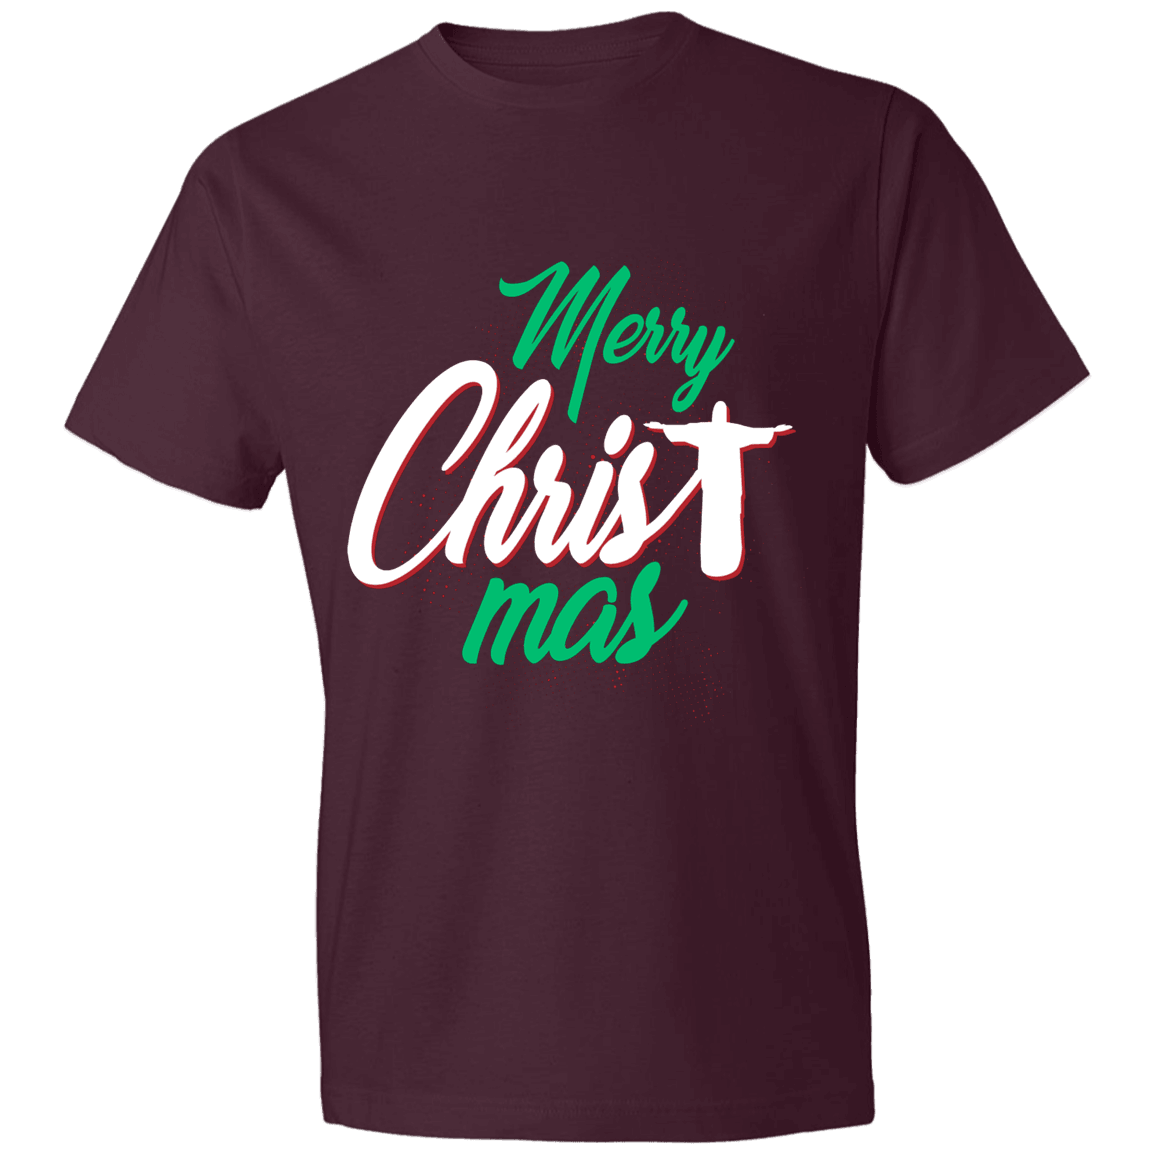 Designs by MyUtopia Shout Out:Merry CHRISTmas - Lightweight Unisex T-Shirt,Maroon / S,Adult Unisex T-Shirt